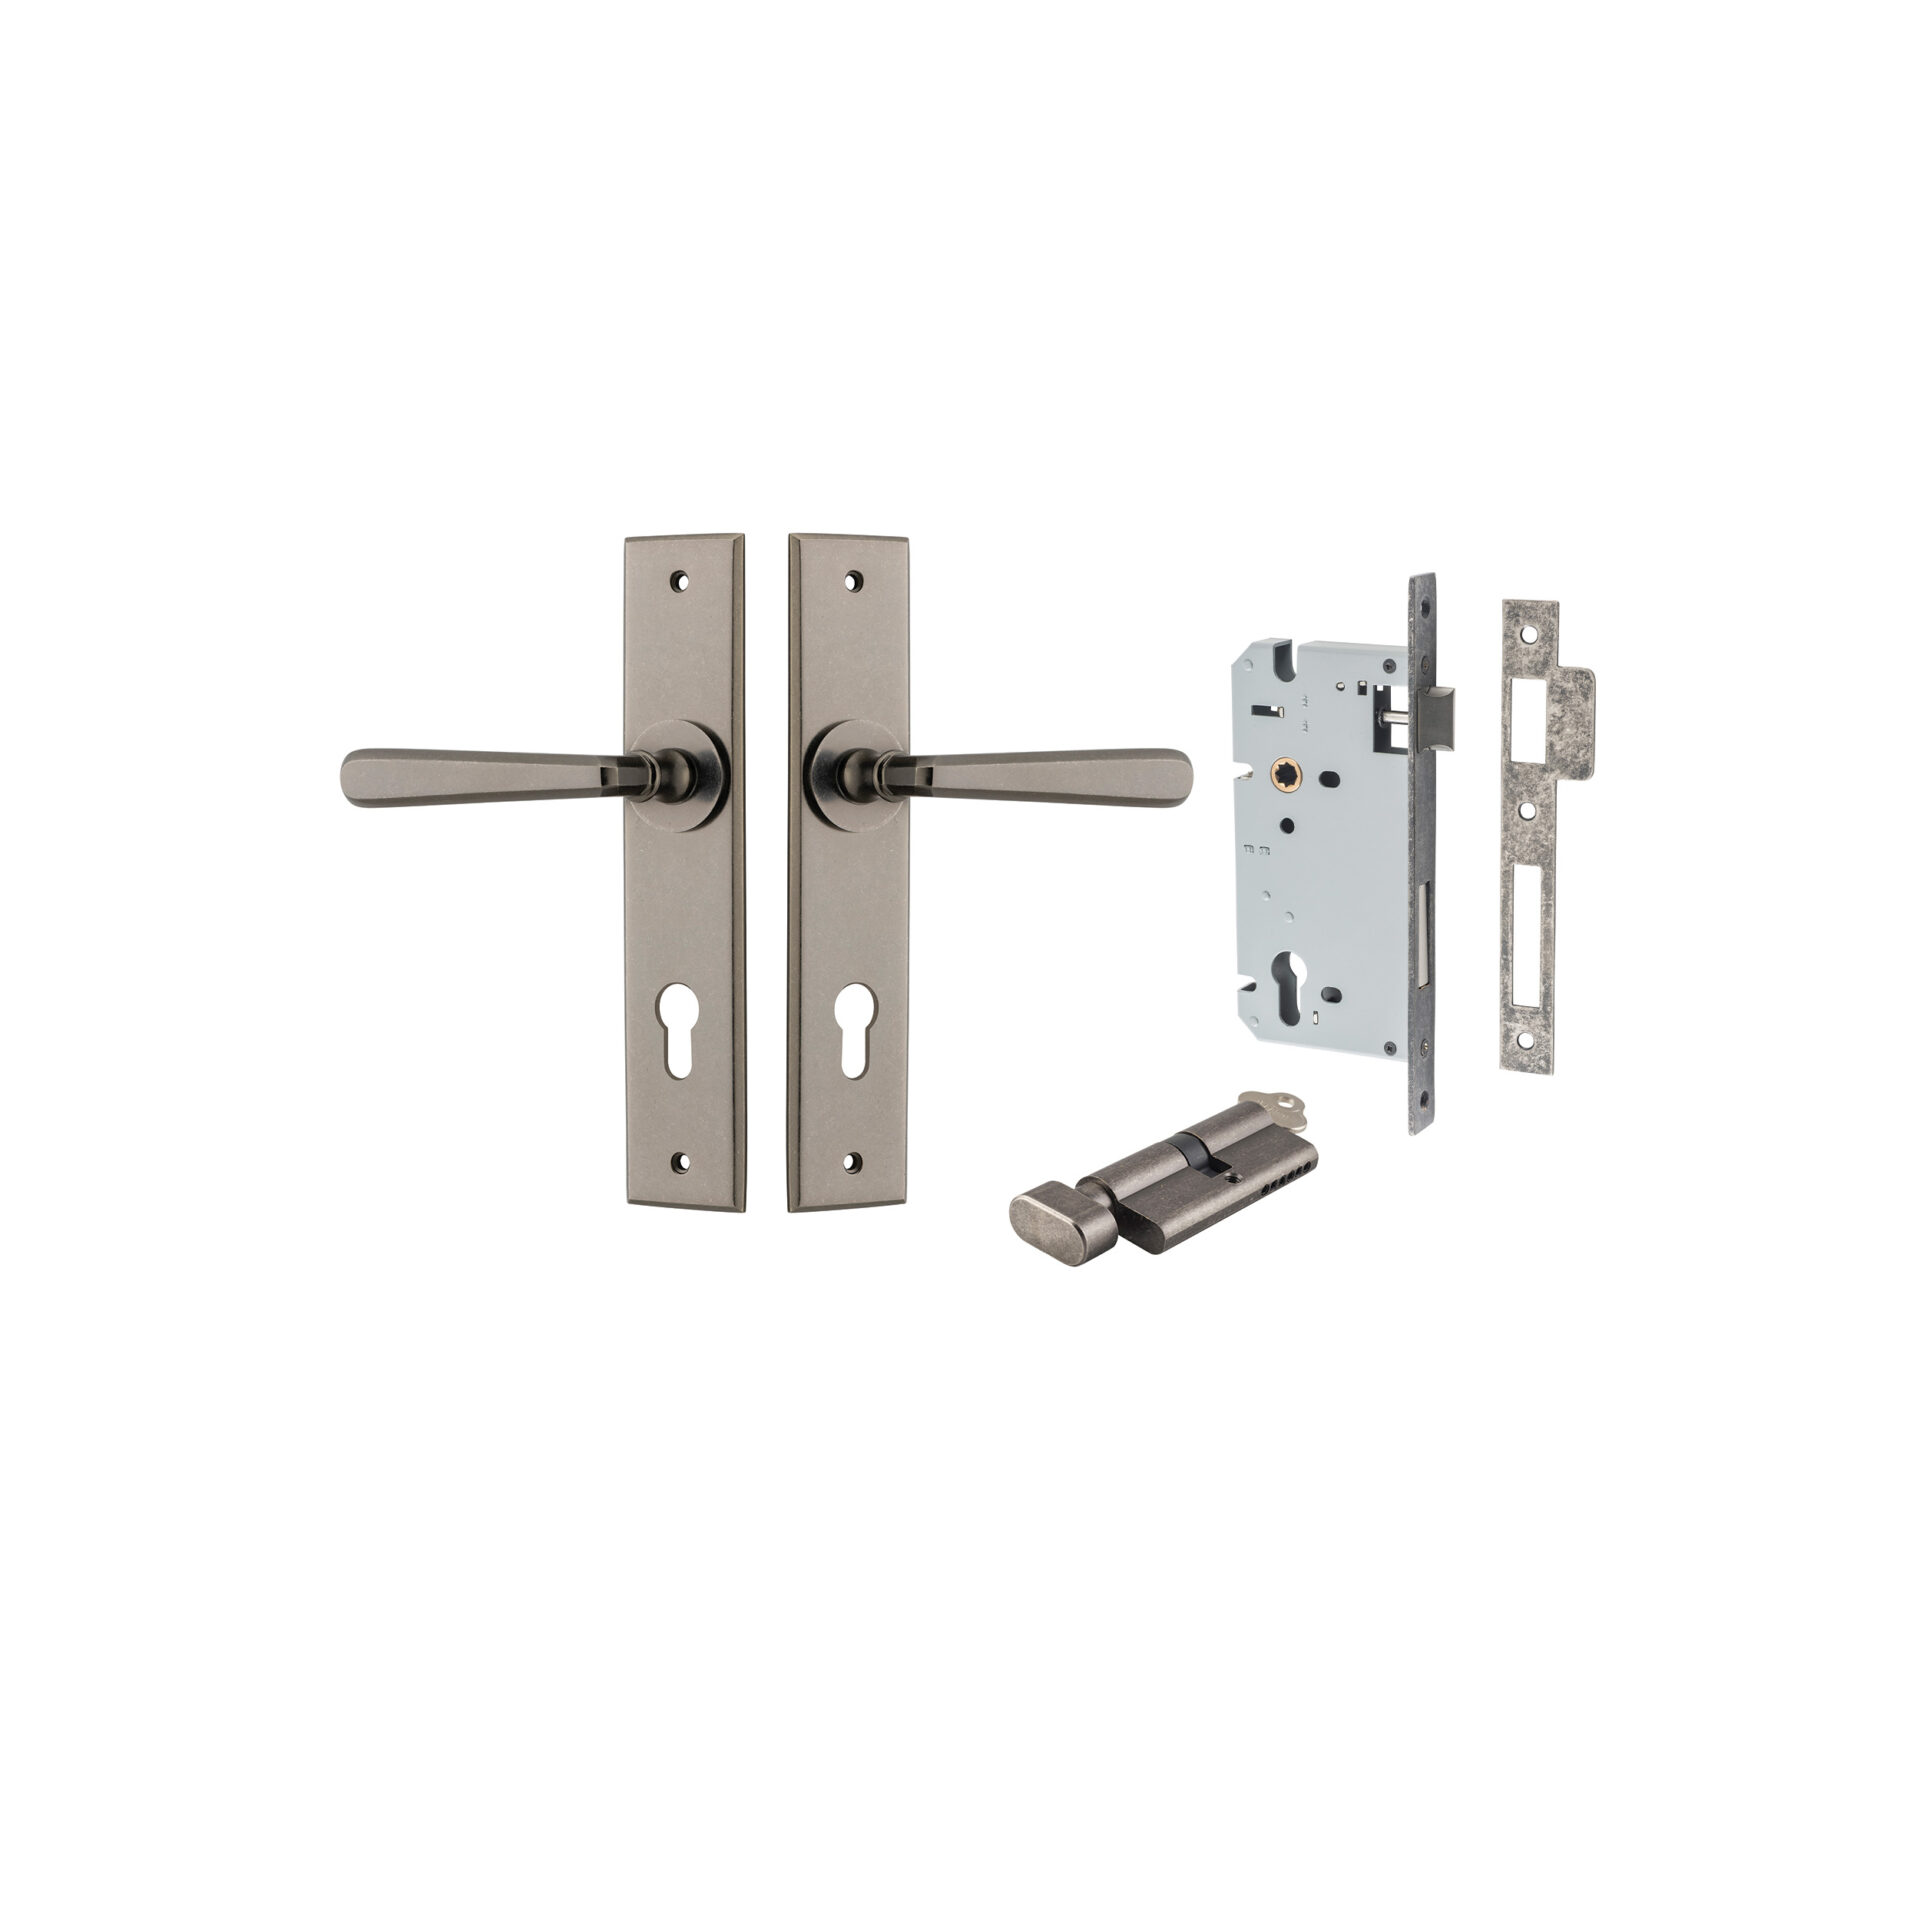 13880KENTR60KT - Copenhagen Lever - Chamfered Backplate Entrance Kit with High Security Lock - Distressed Nickel - Entrance